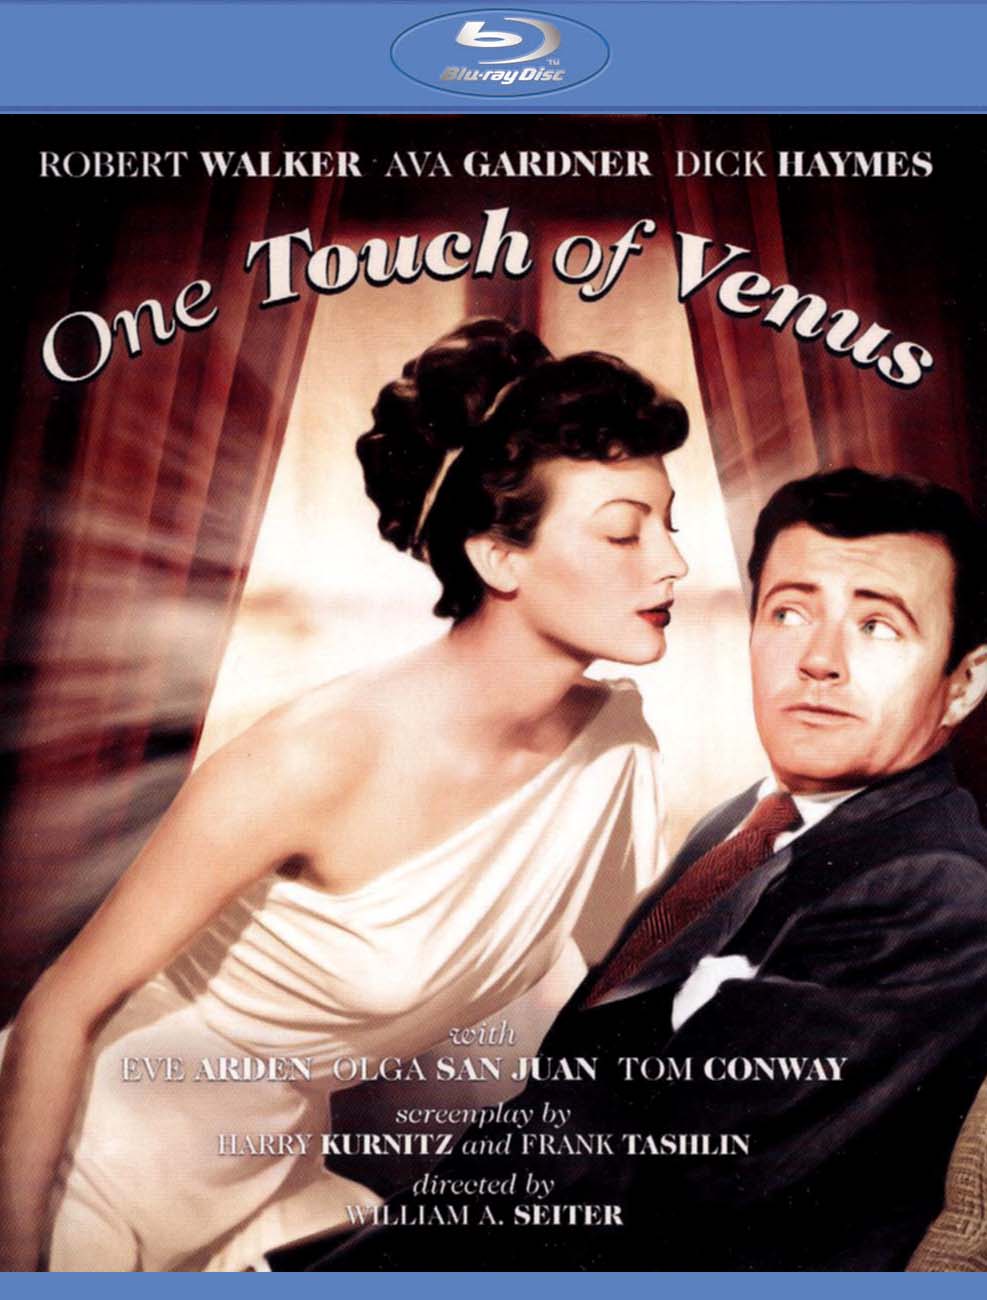 One Touch of Venus [Blu-ray] [1948]